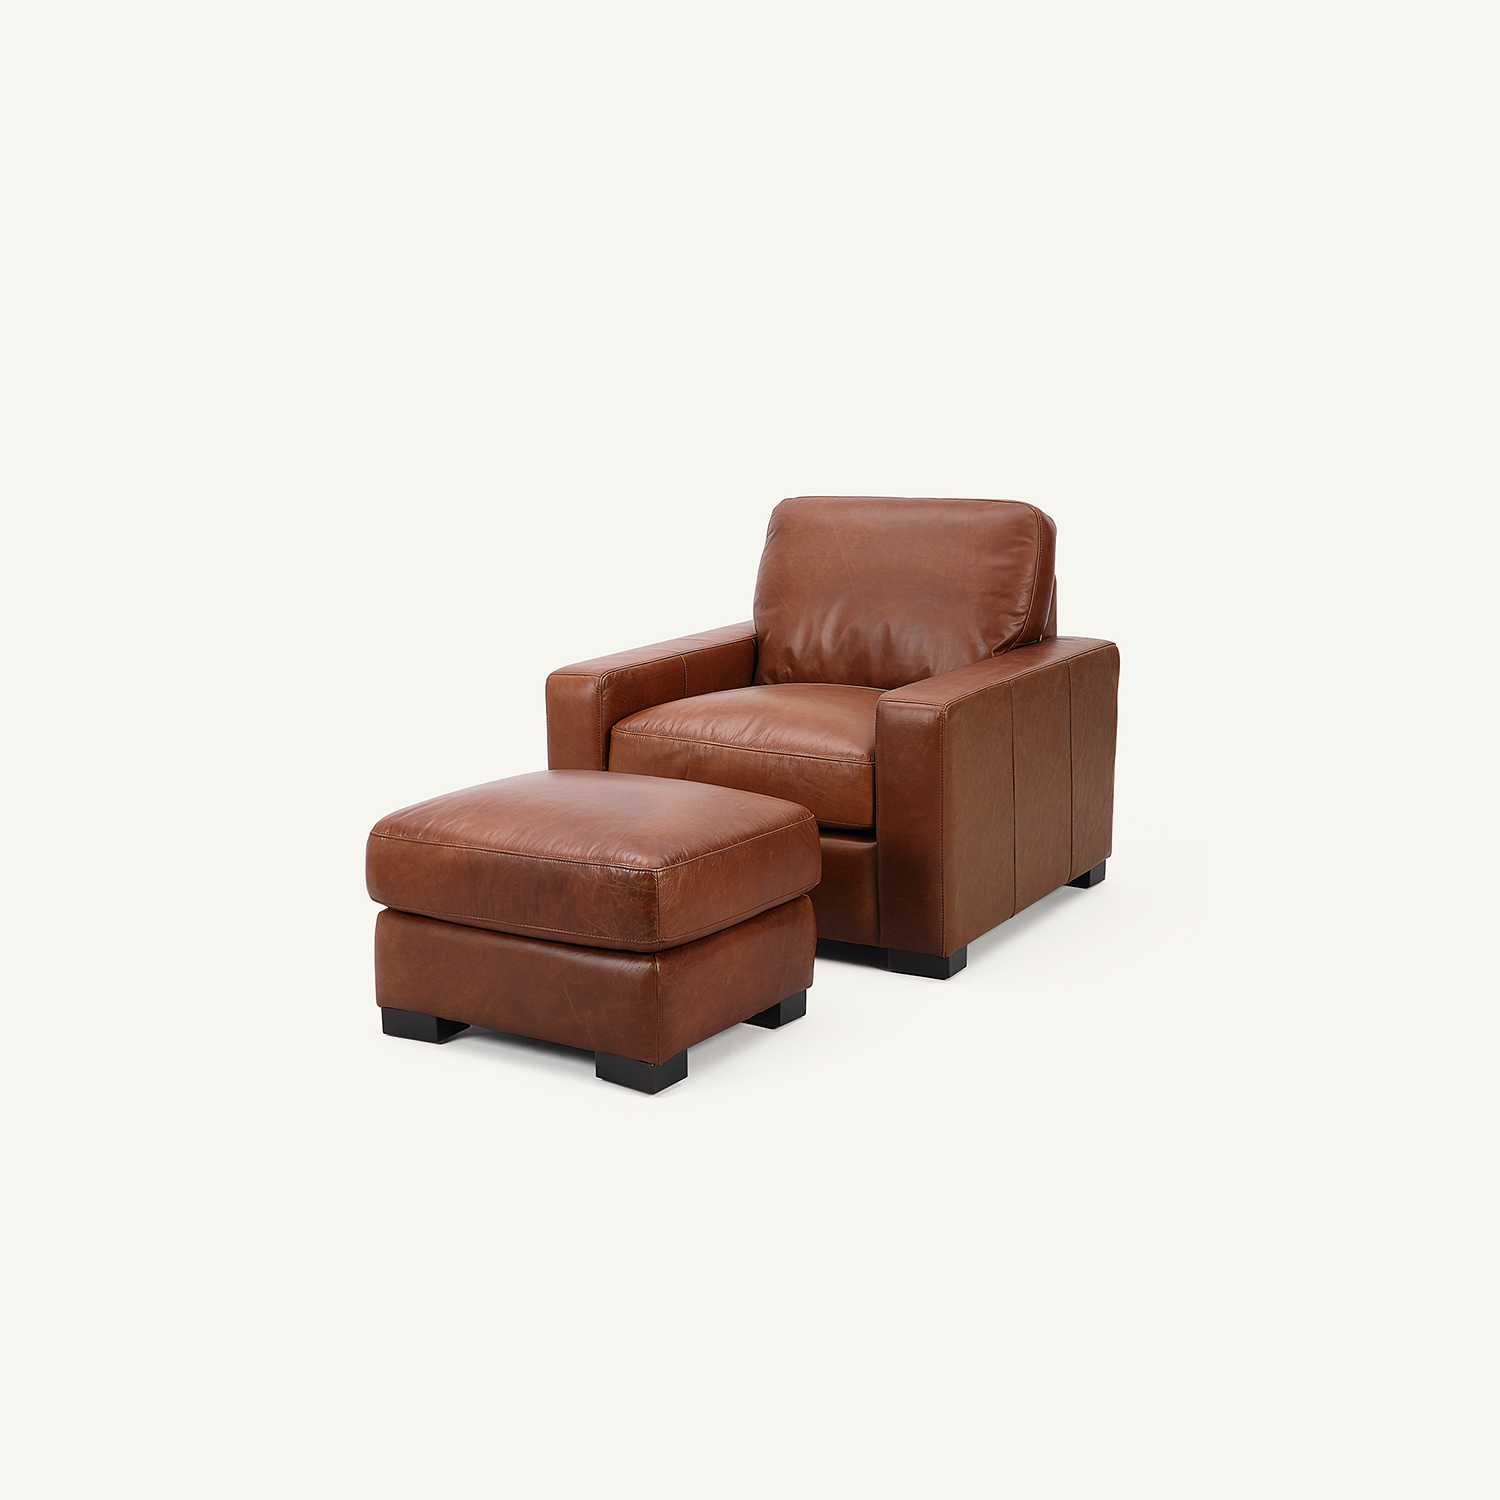 Randall Chestnut Brown Oil Wax Leather Accent Chair with Ottoman